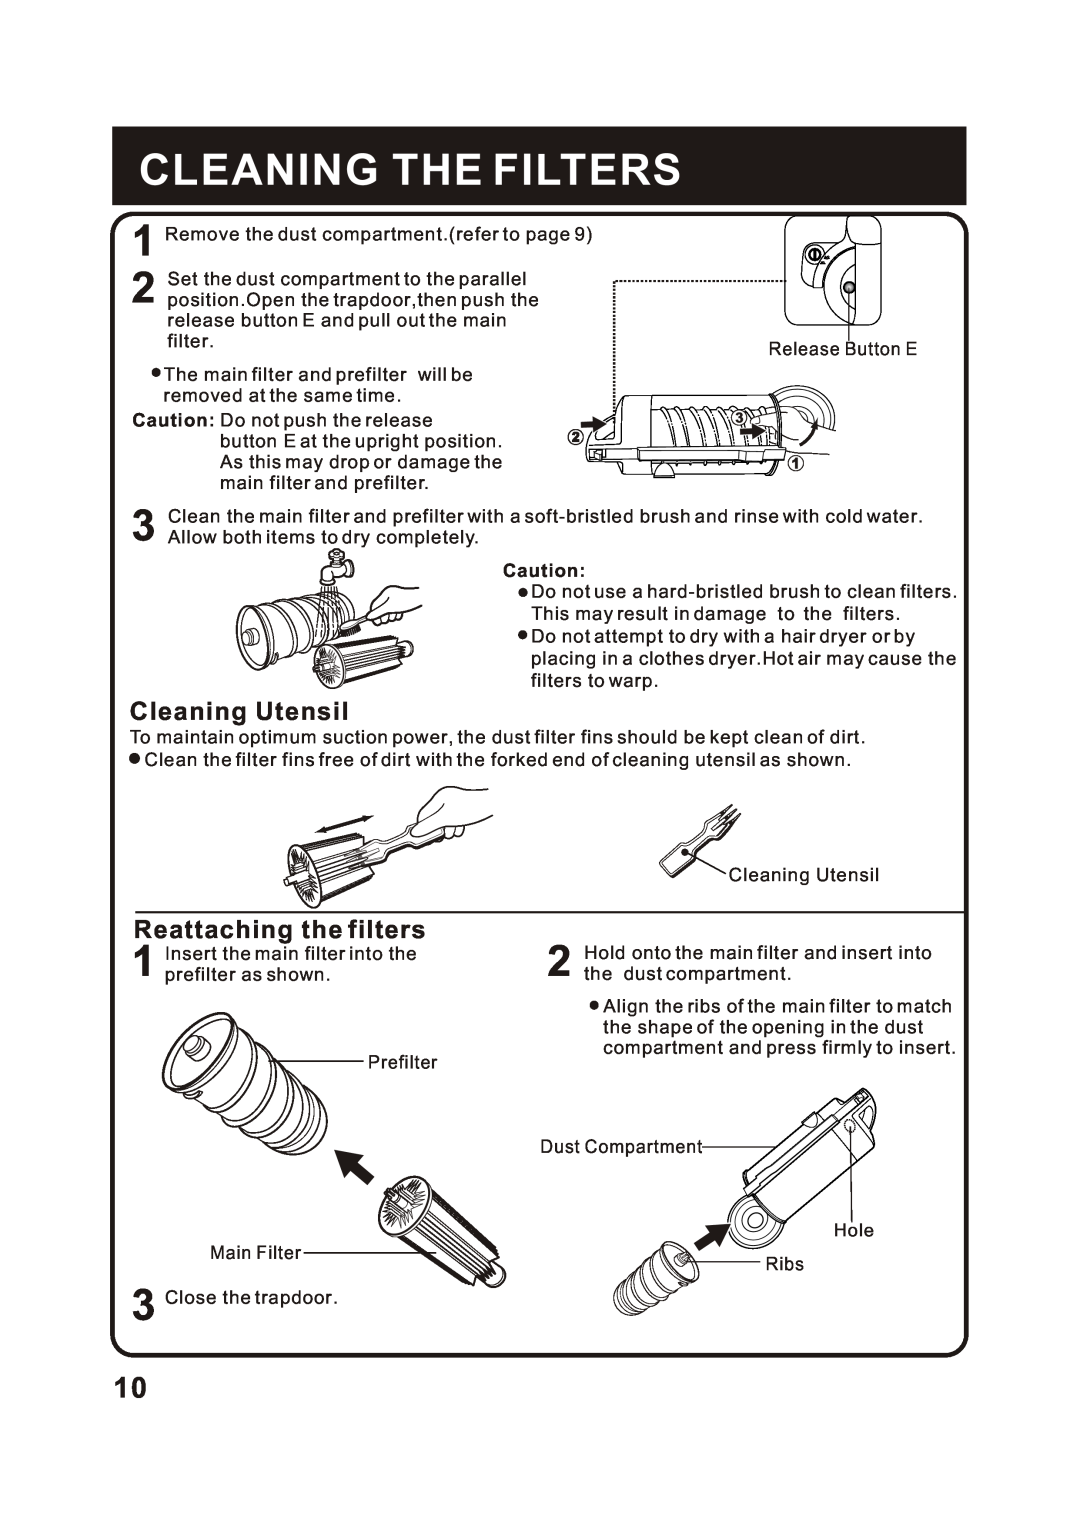 Fantom Vacuum FM780 instruction manual Cleaning The Filters, Cleaning Utensil, Reattaching the filters 